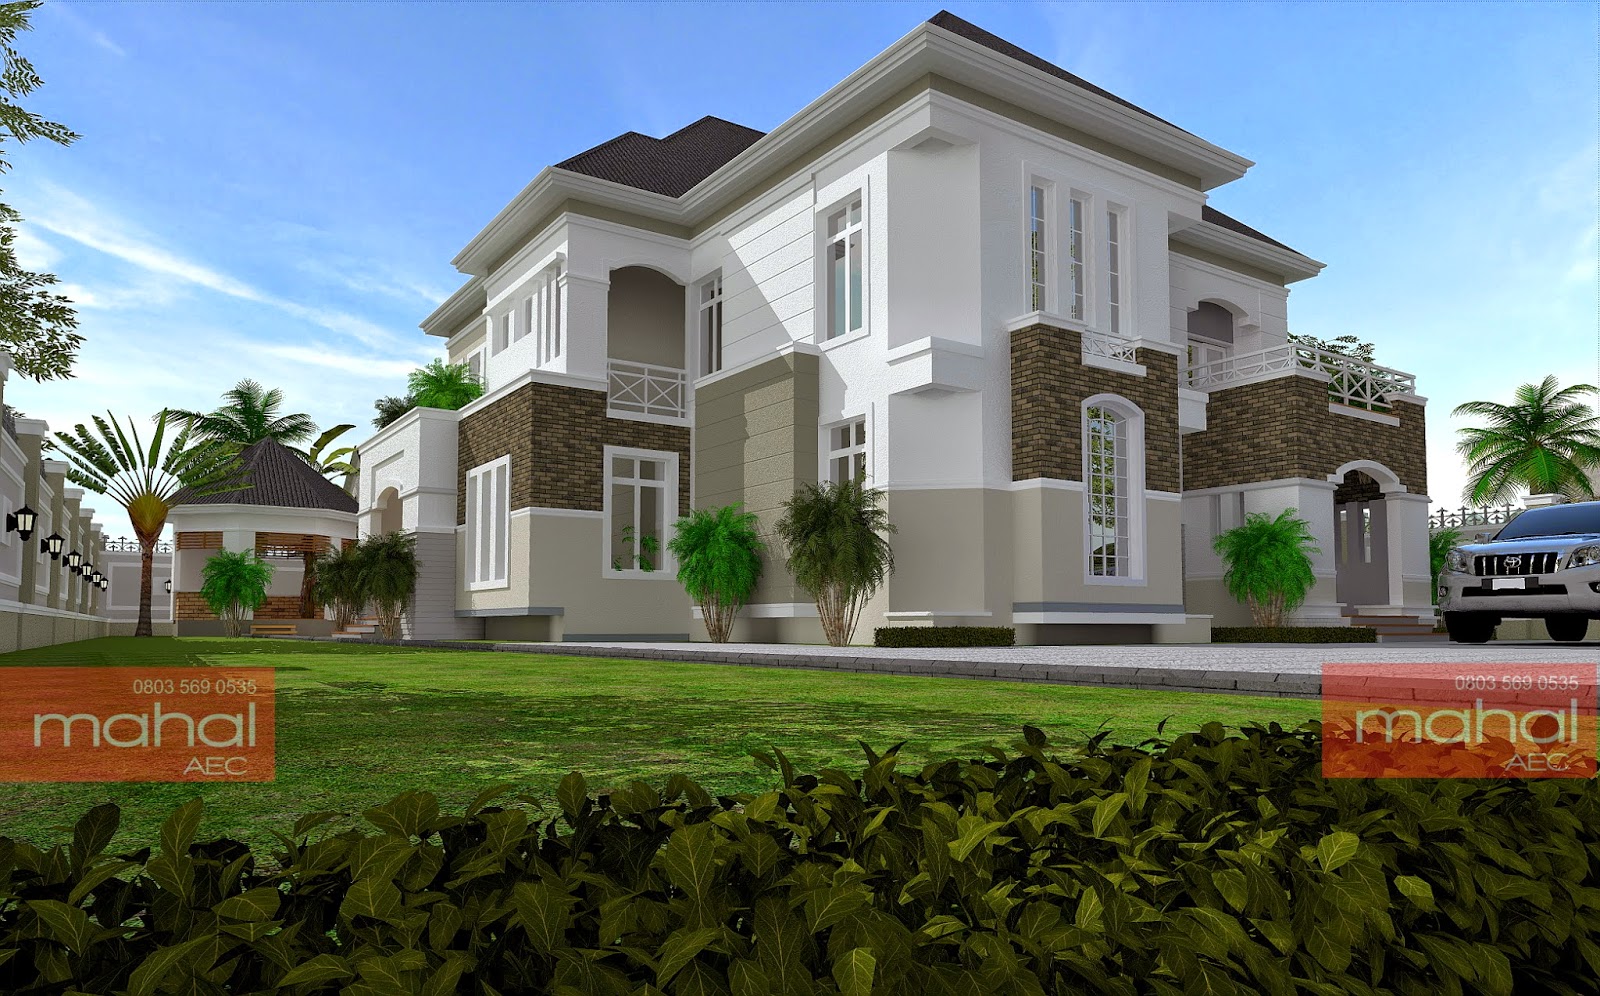 6 Bedroom Bungalow House  Plans  In Nigeria  Modern House 